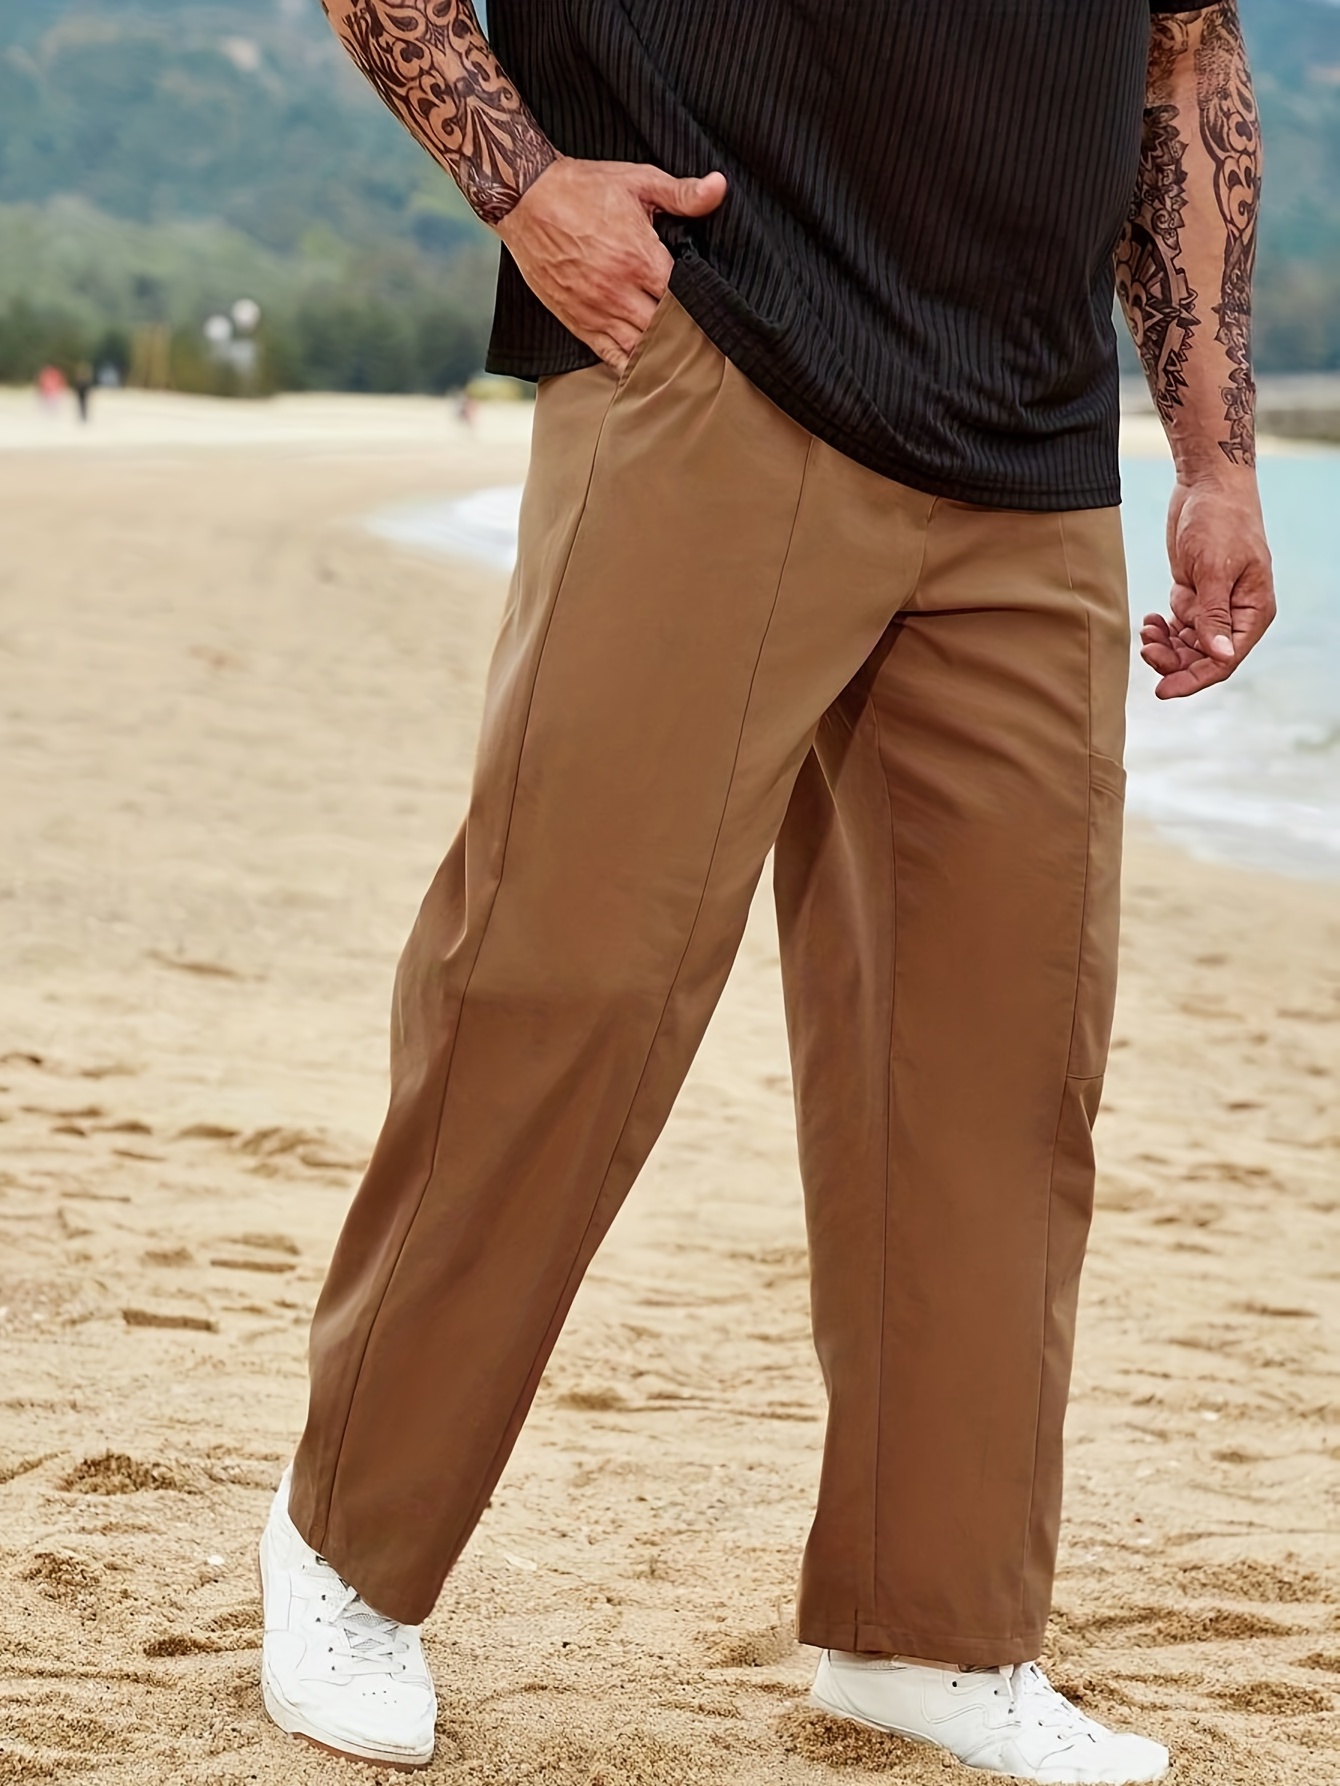 Plus Size Men's Casual Solid Cargo Pants With Pocket For Outdoor/workout,  Trendy Oversized Loose Fit Work Pants For Big & Tall Males, Men's Clothing